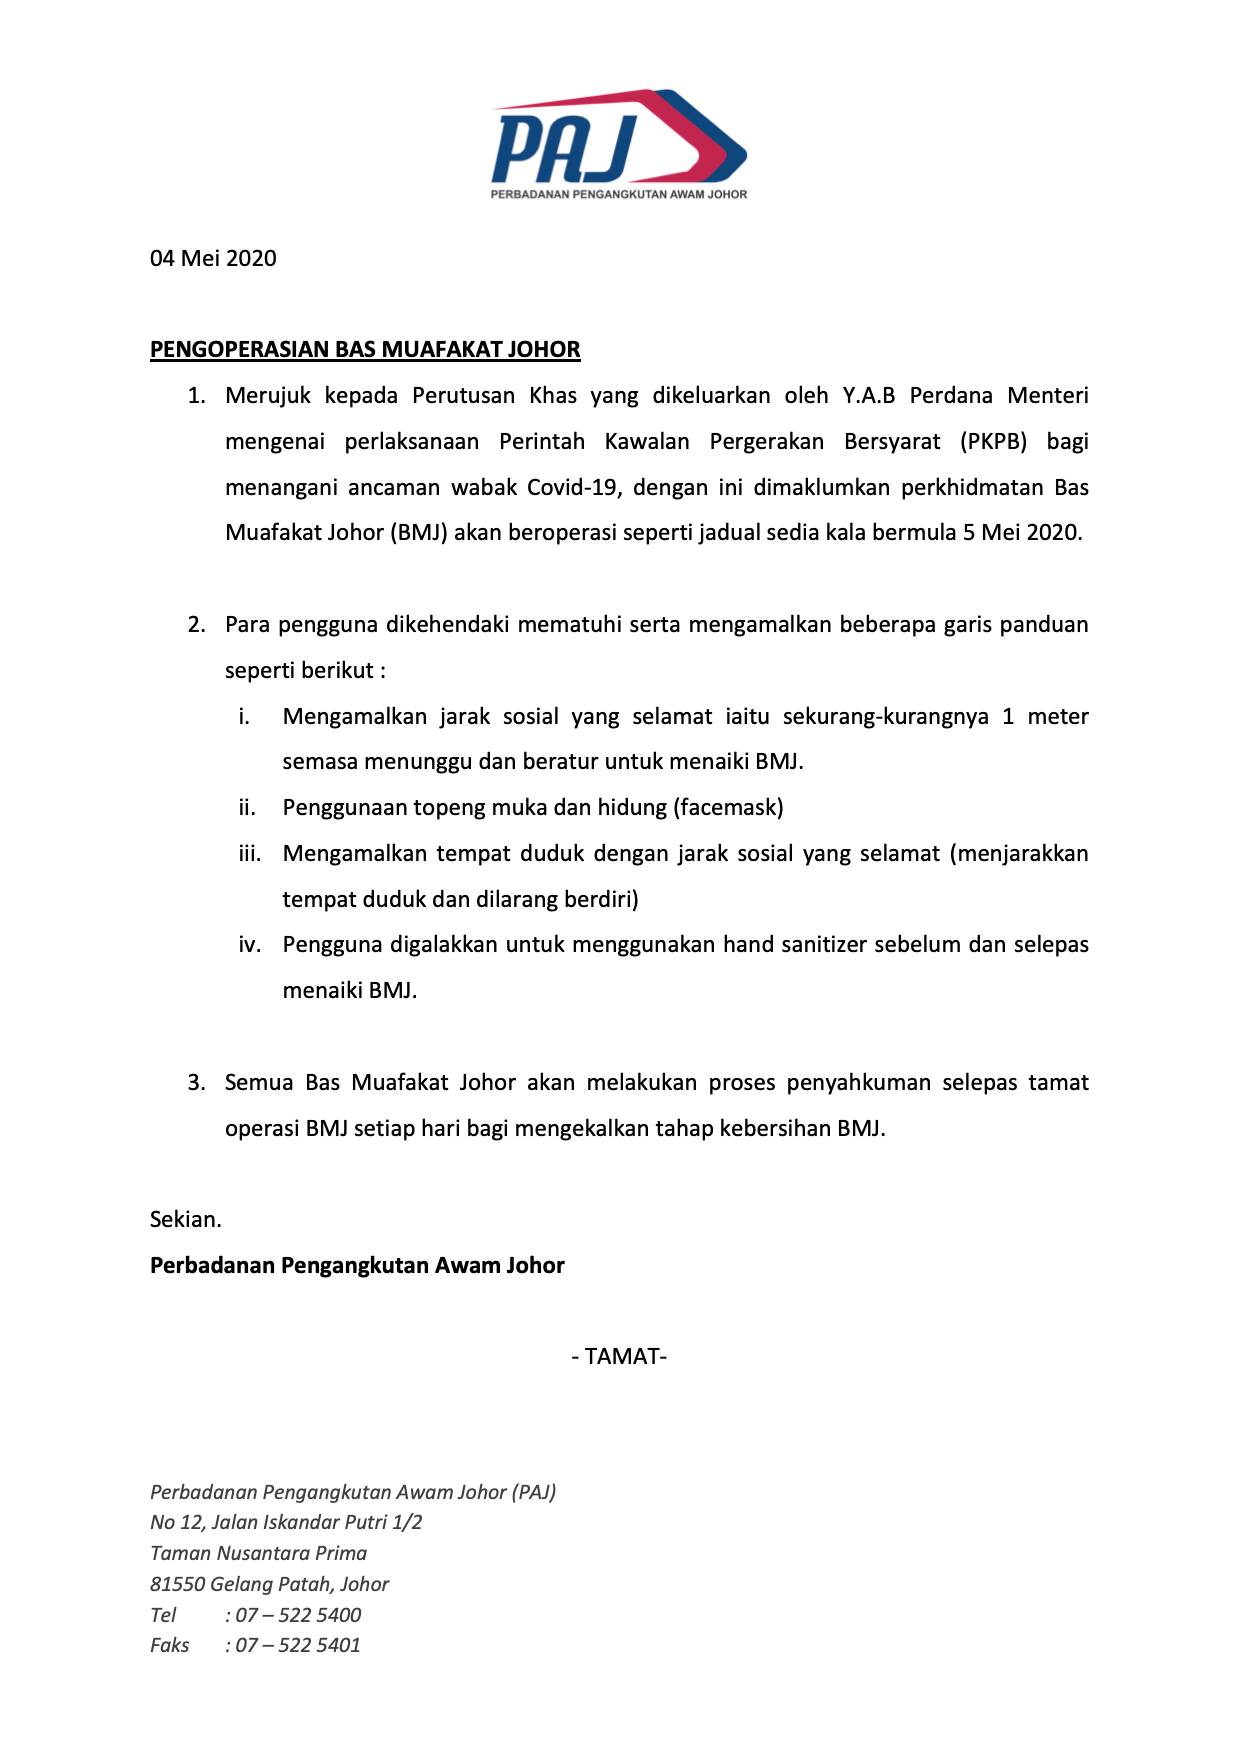 Official poster on resumption of Bas Muafakat Johor bus services from 5 May 2020